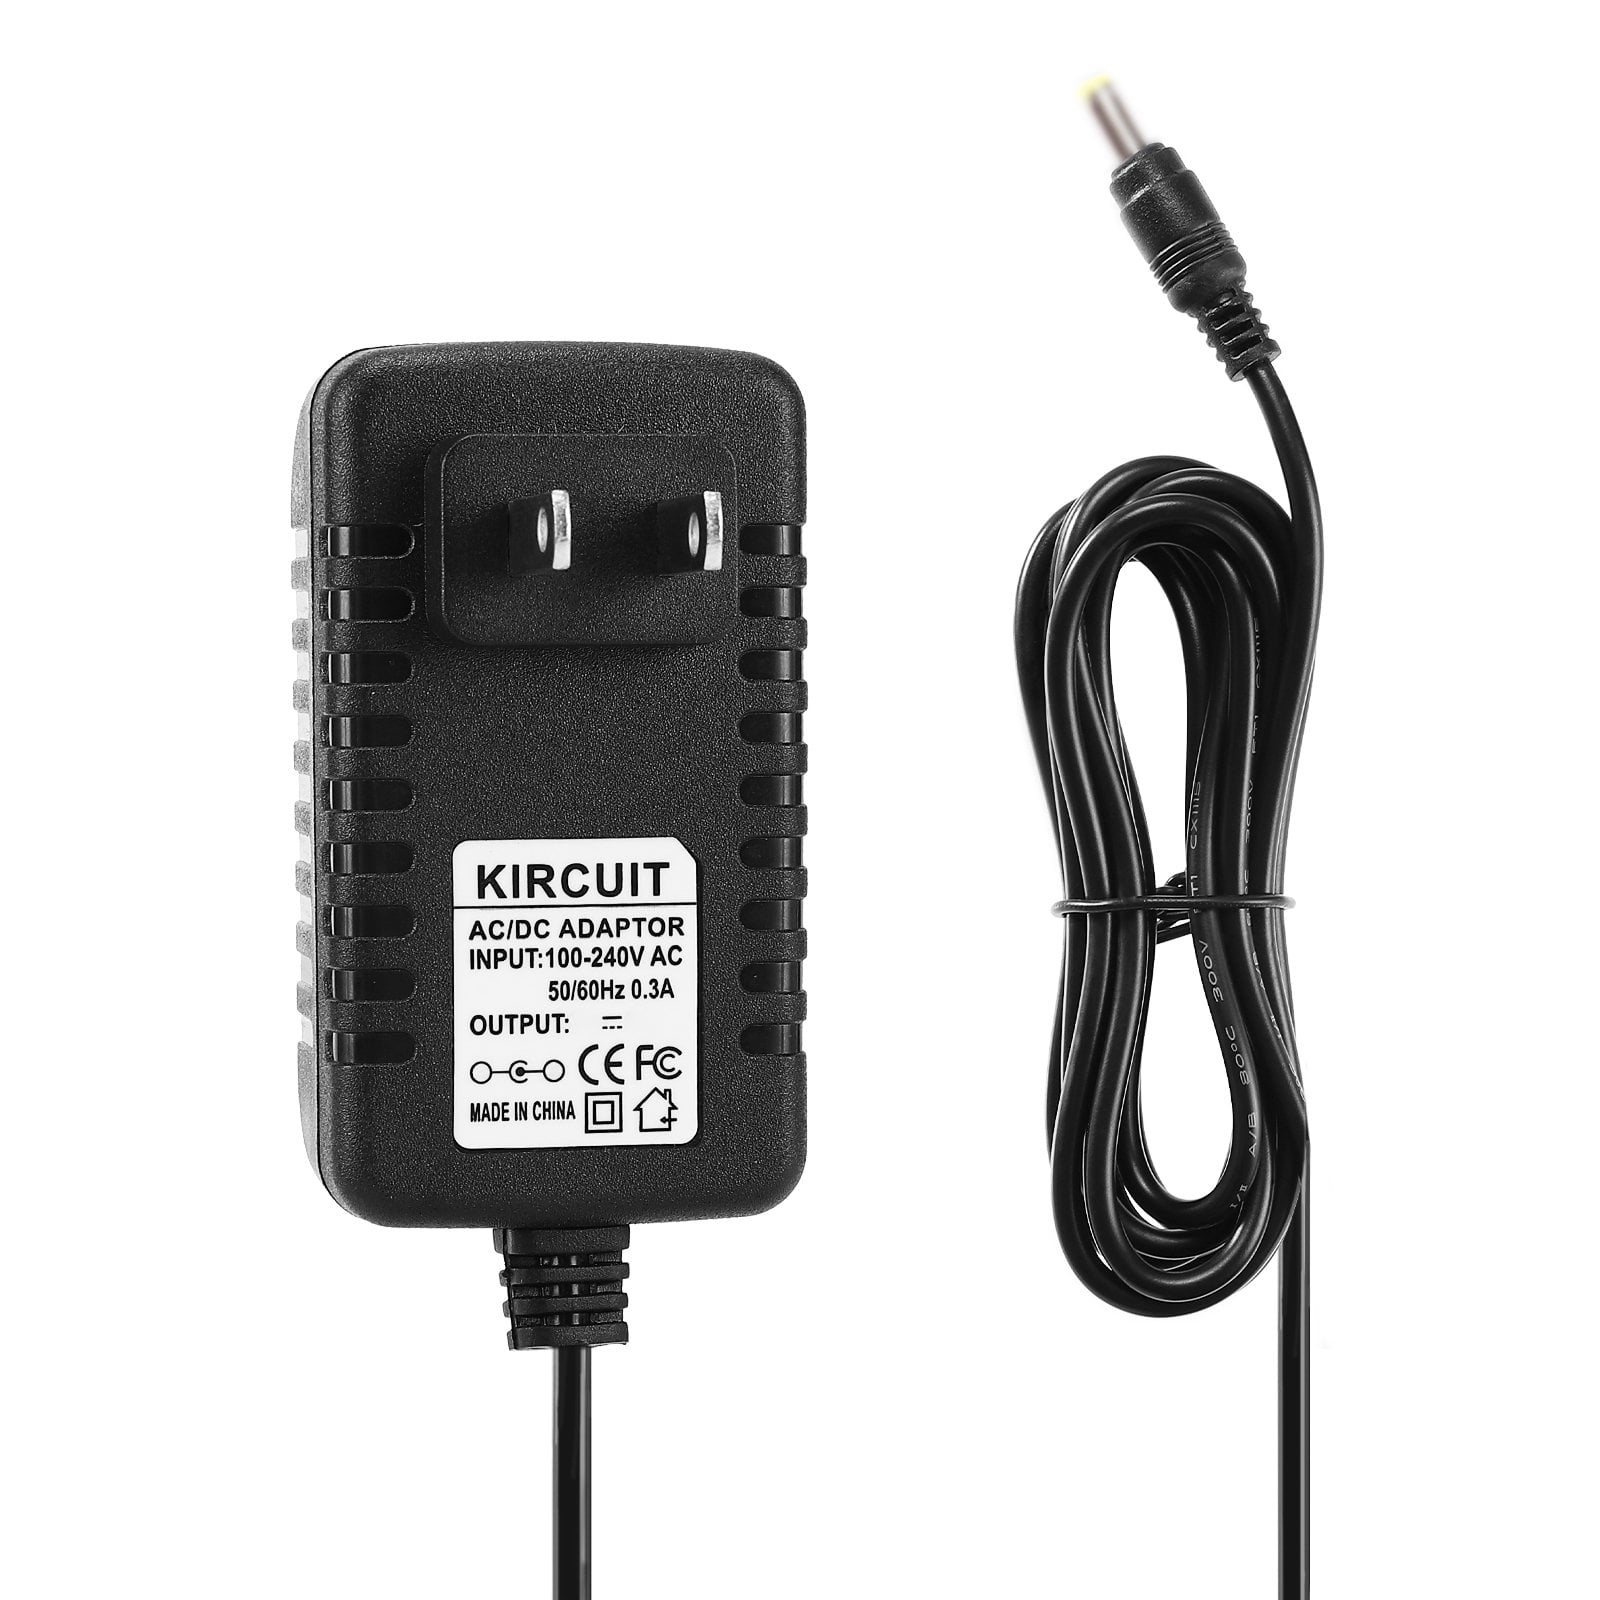 Kircuit 12V 1A AC/DC Adapter Replacement for LEI IU15-2120100-WP IU152120100WP P/N: IU15 21120 Quantum 12VDC 1.0A Universal I.T.E Power Supply Cord Charger - Walmart.com